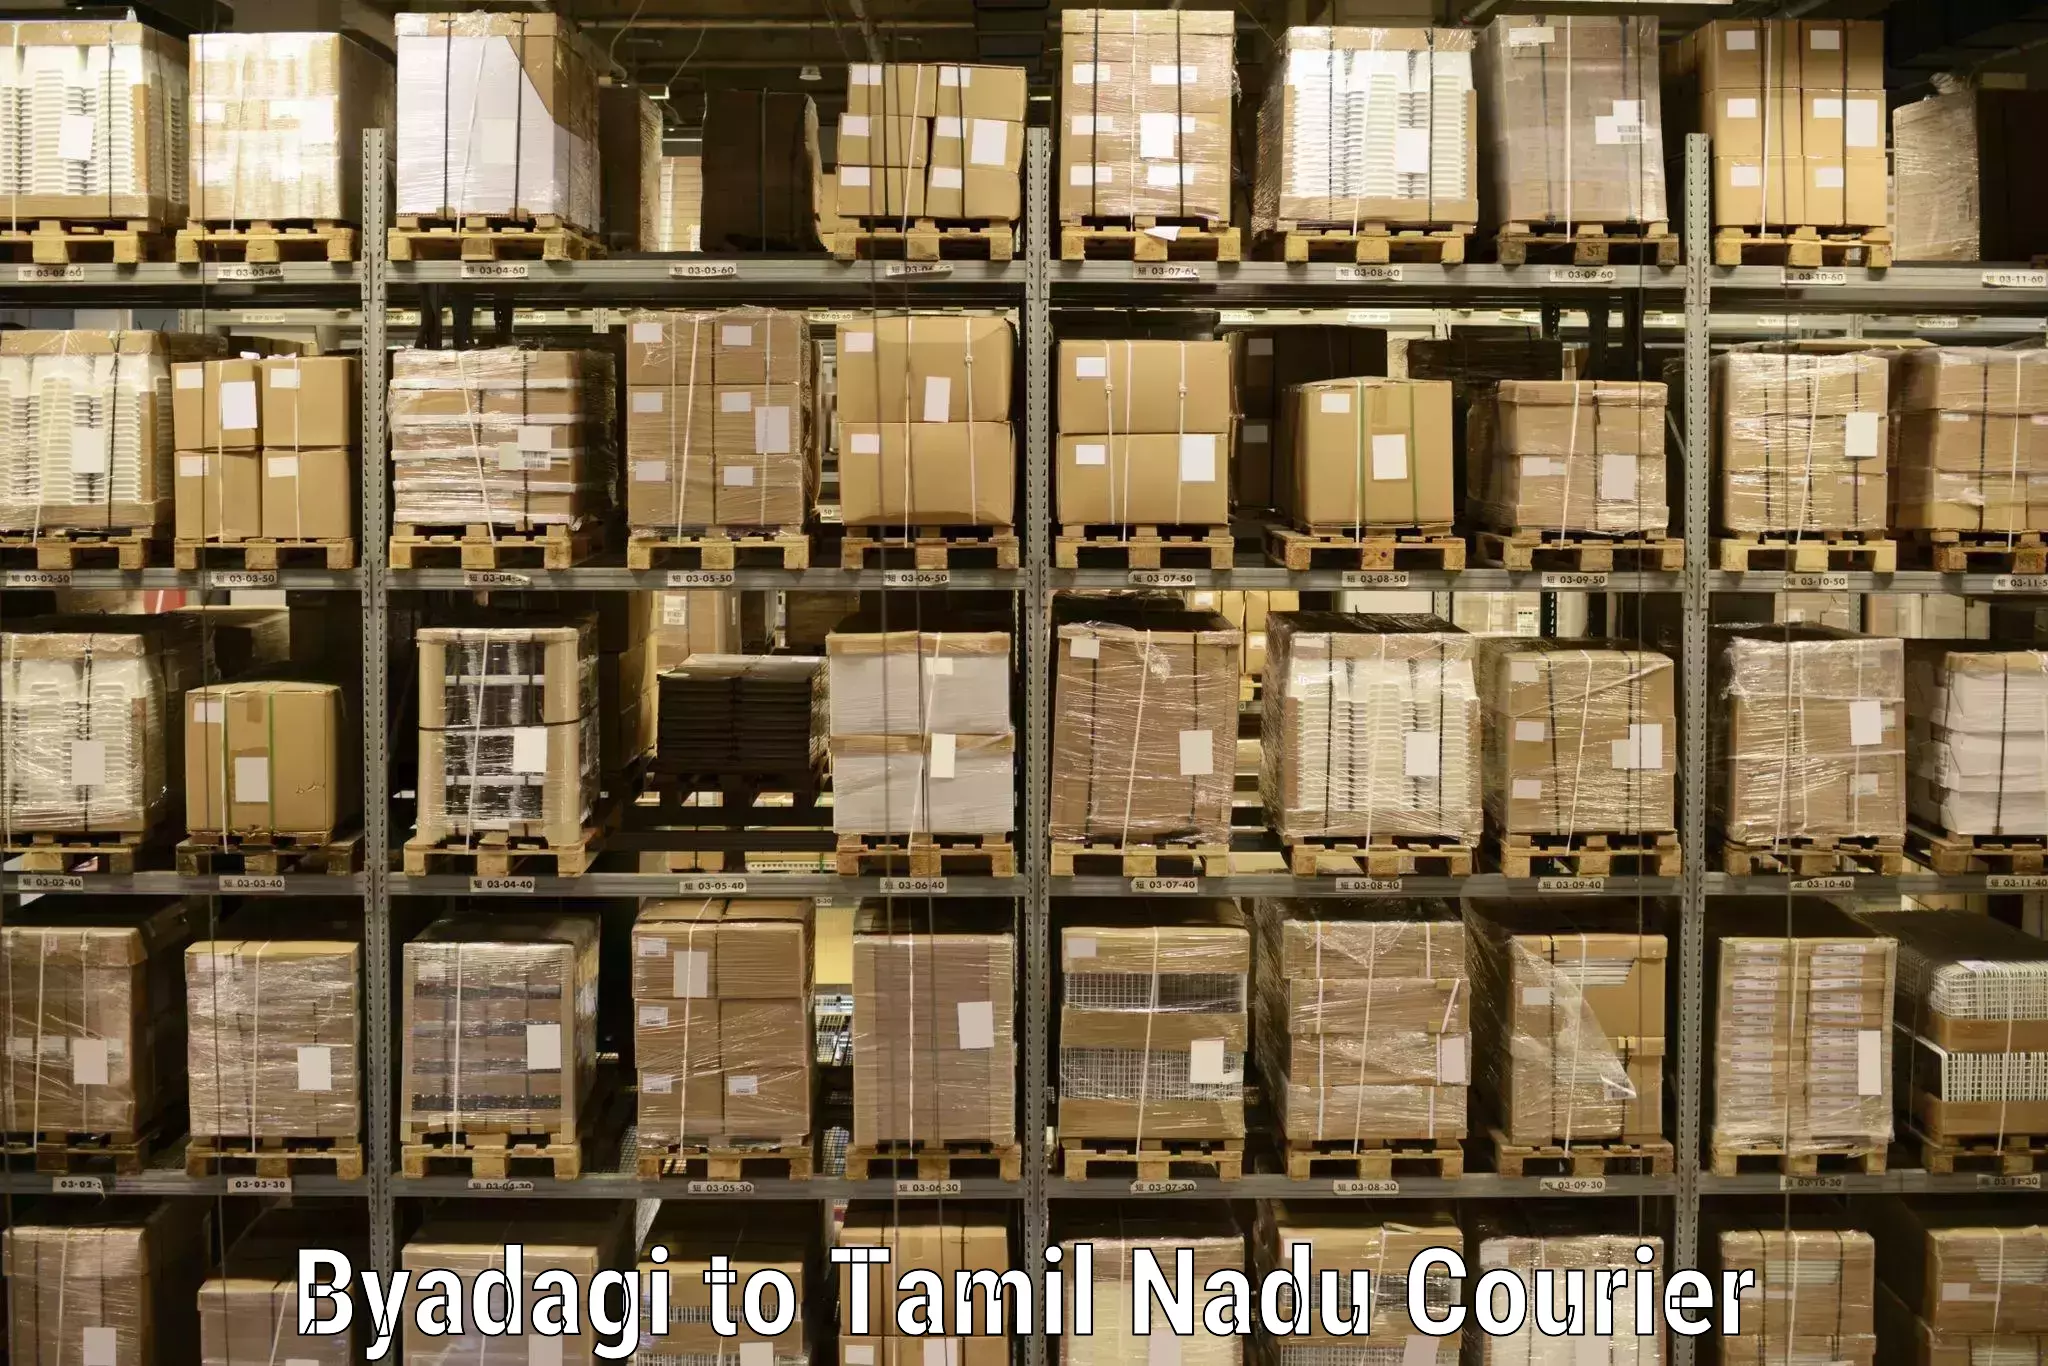 Reliable delivery network Byadagi to Ayyampettai